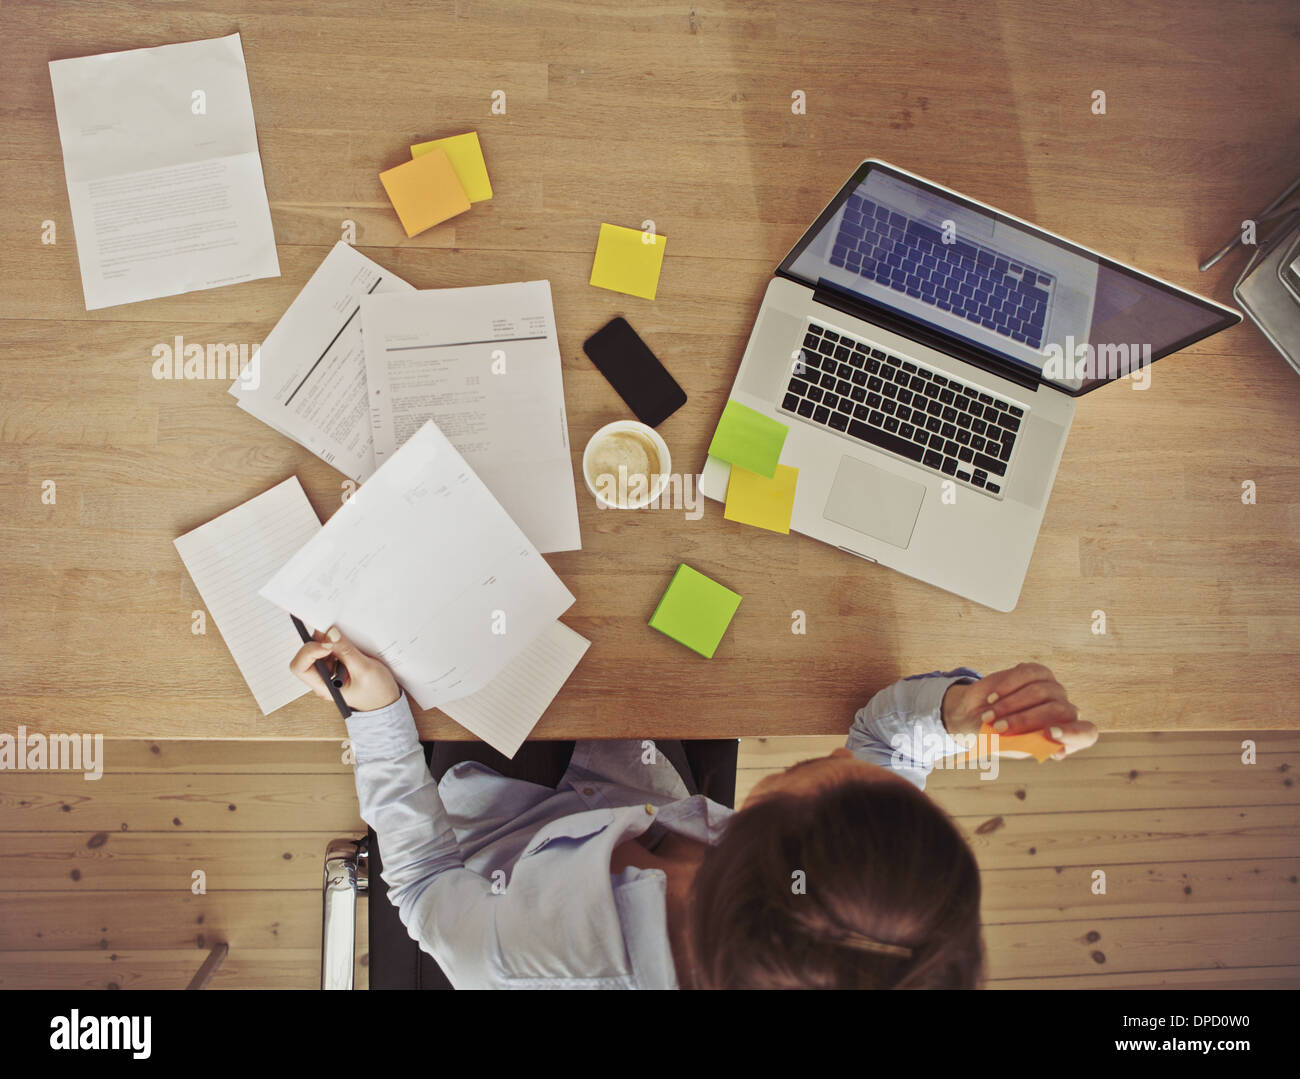 Top view of young woman working at her desk with laptop and documents. Business woman working at desk in office. Stock Photo